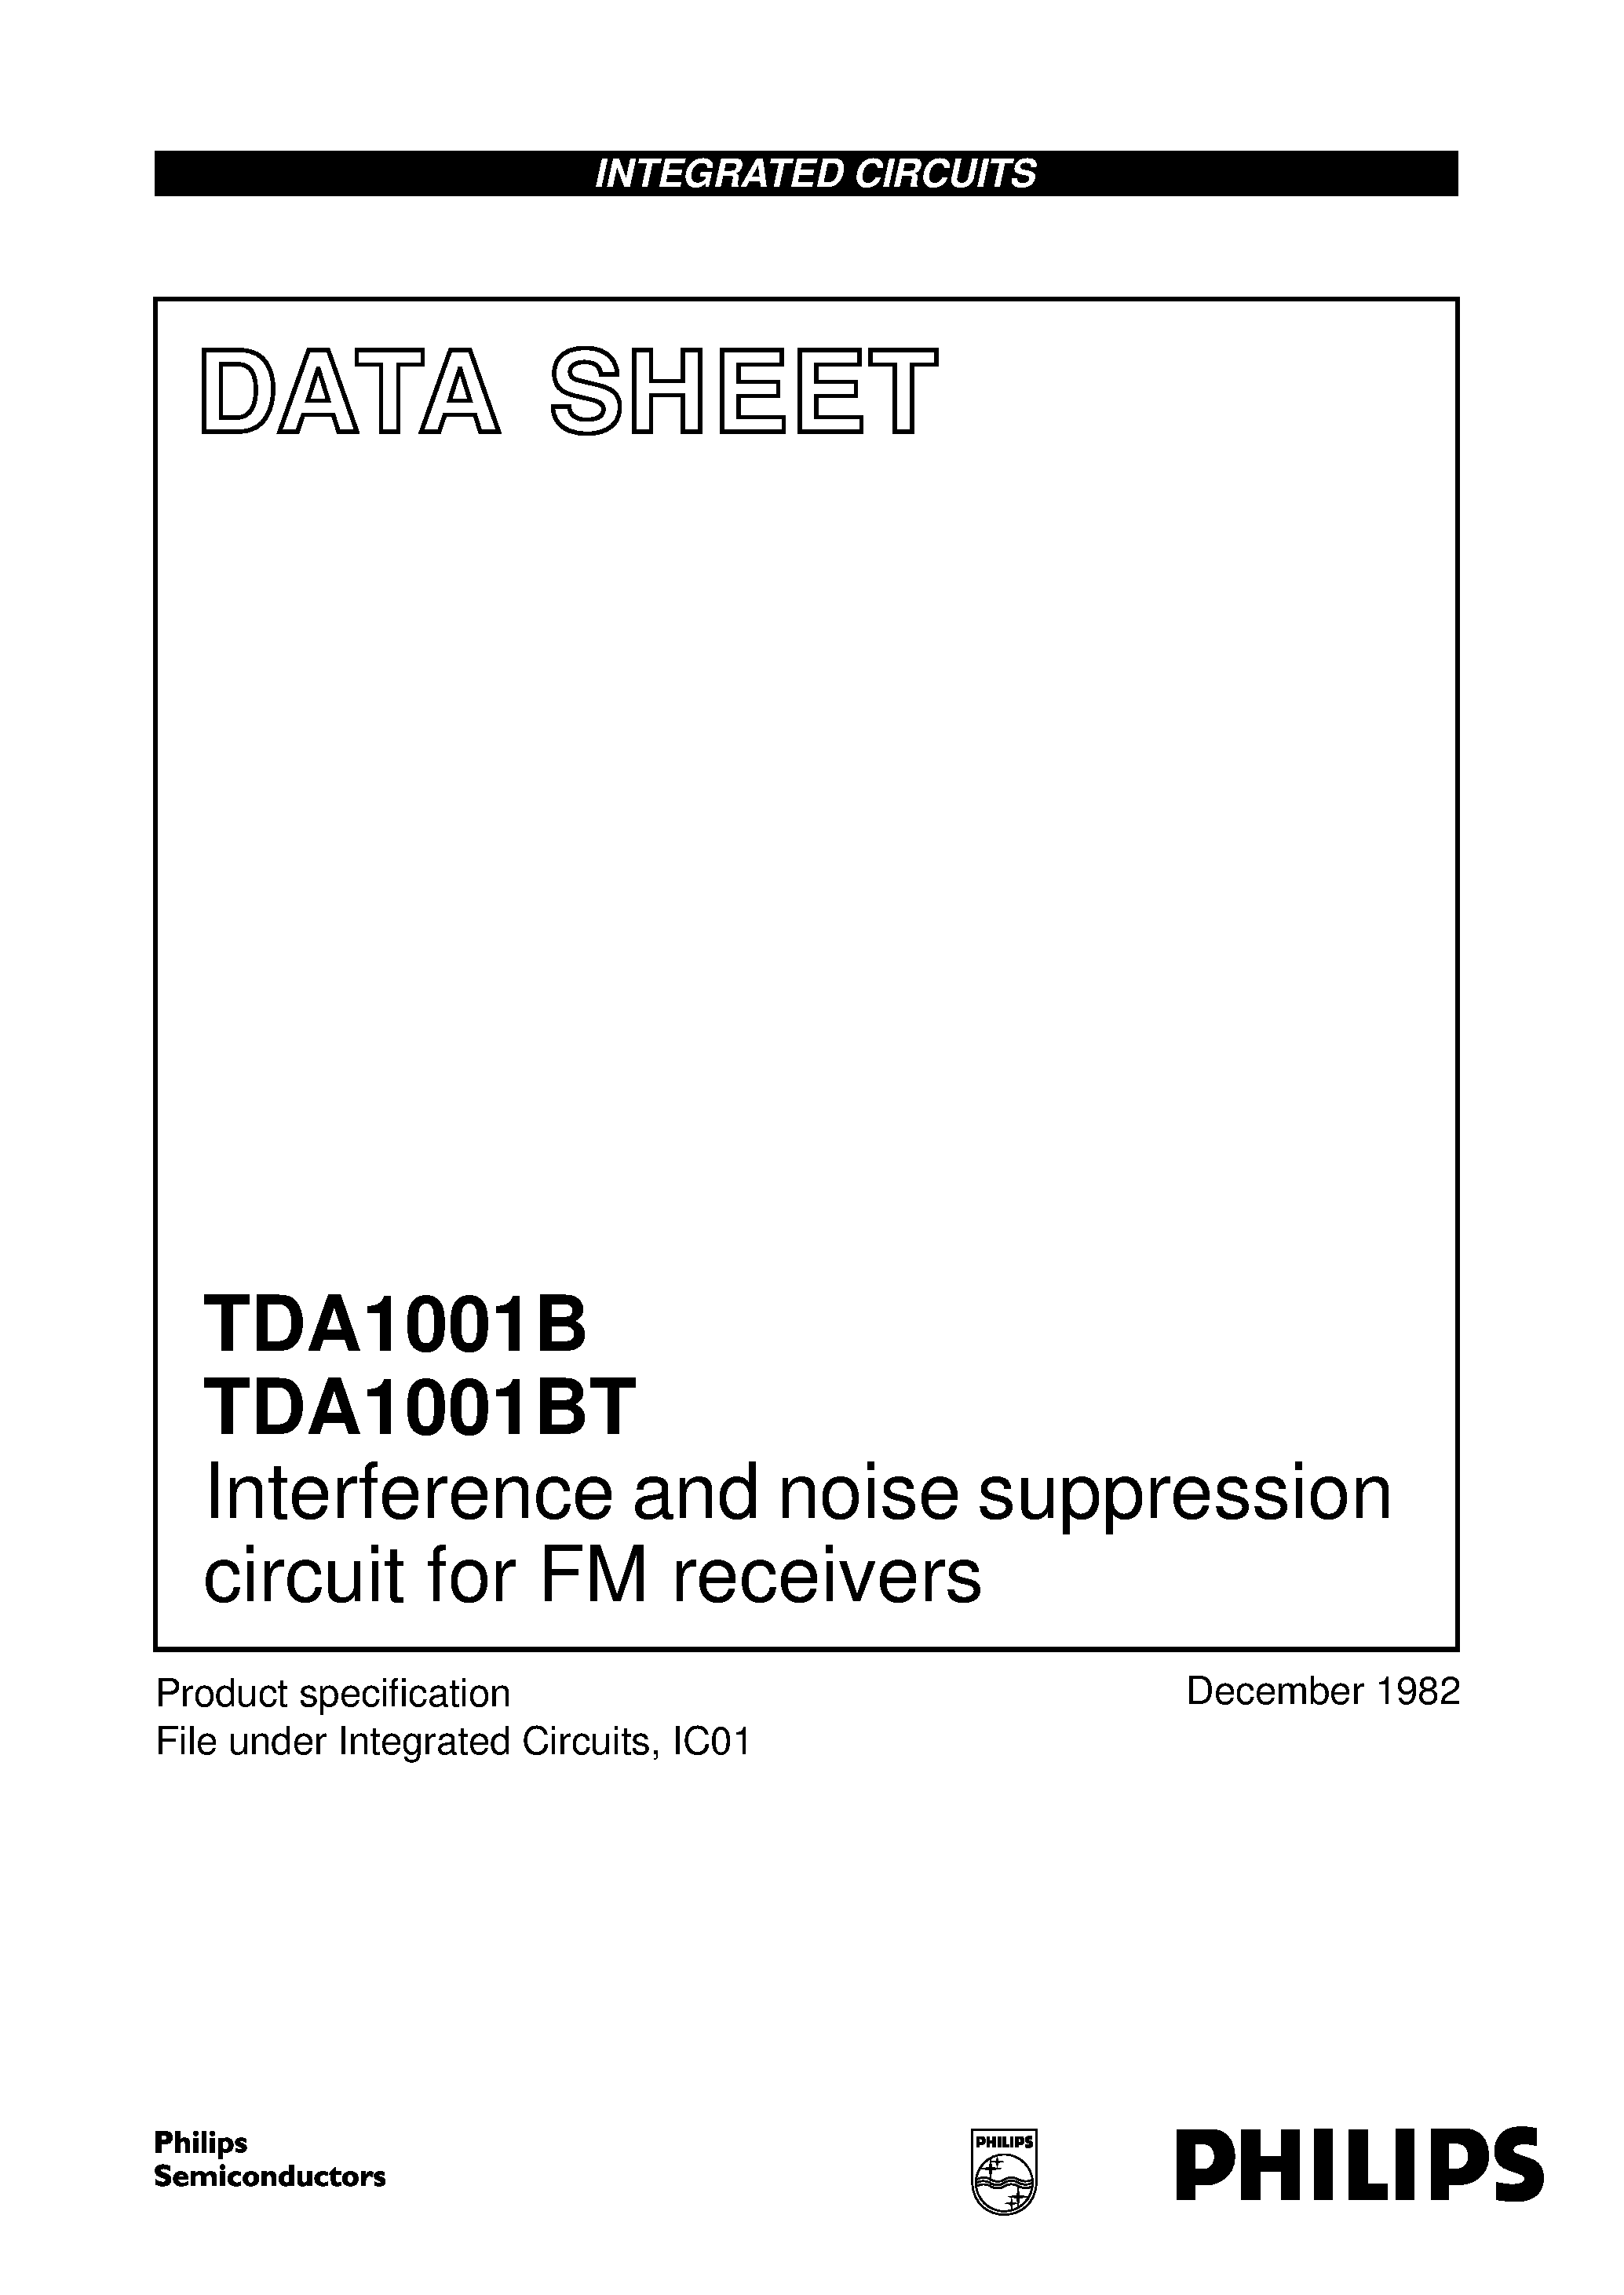 Datasheet TDA1001BT - Interference and noise suppression circuit for FM receivers page 1